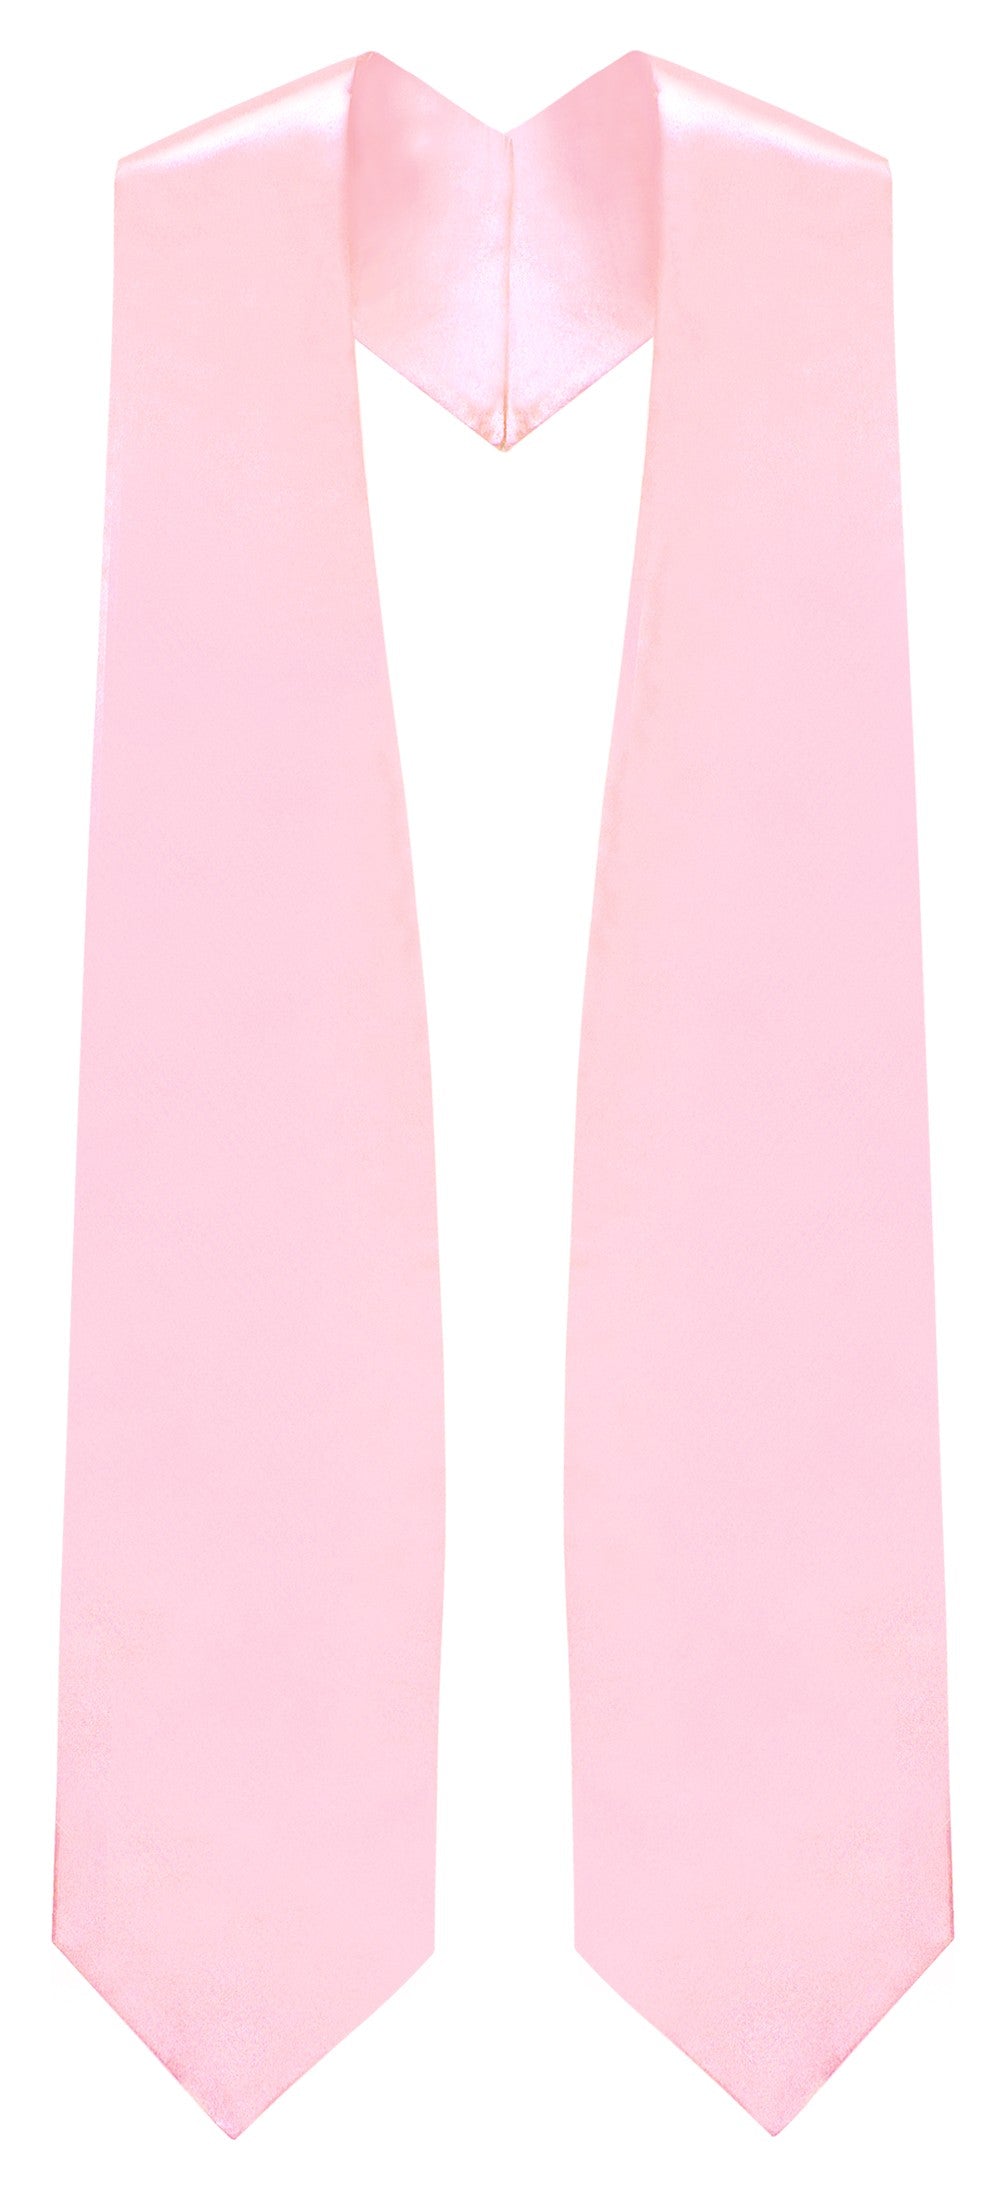 Pink Graduation Stole - Pink College & High School Stoles - Graduation Cap and Gown